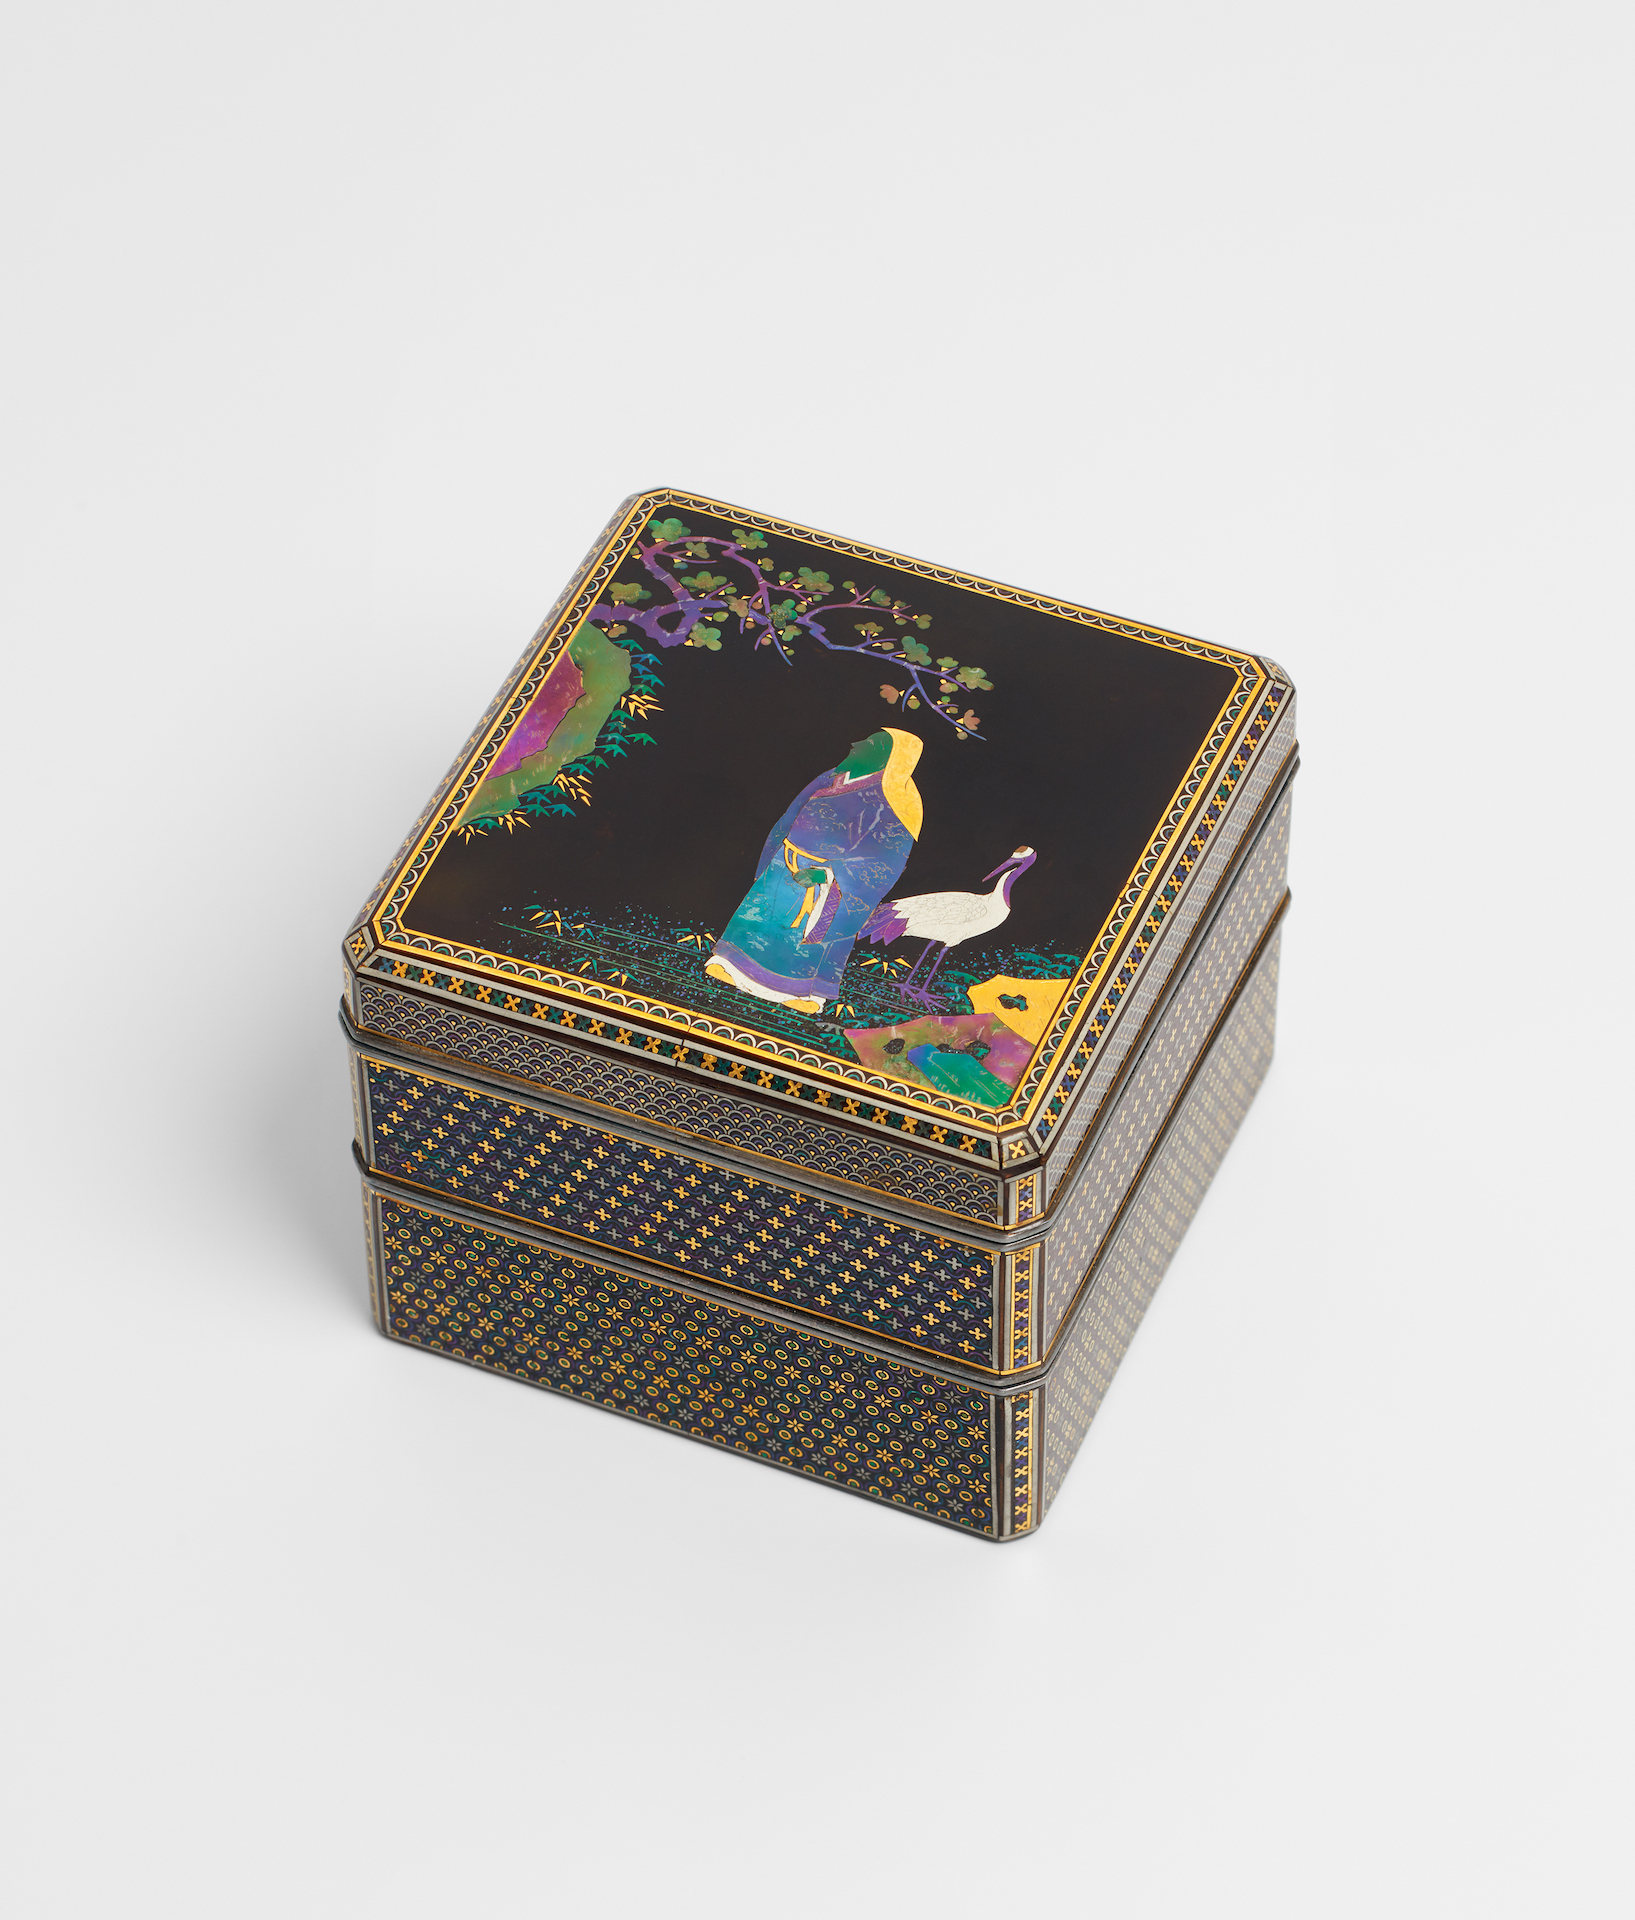 A Somada lacquer tiered incense box (jukoko), depicting the hermit Lin Pu and a crane, Meiji period (late 19th century), 6.3 x 6.3 x 5.1 cm.